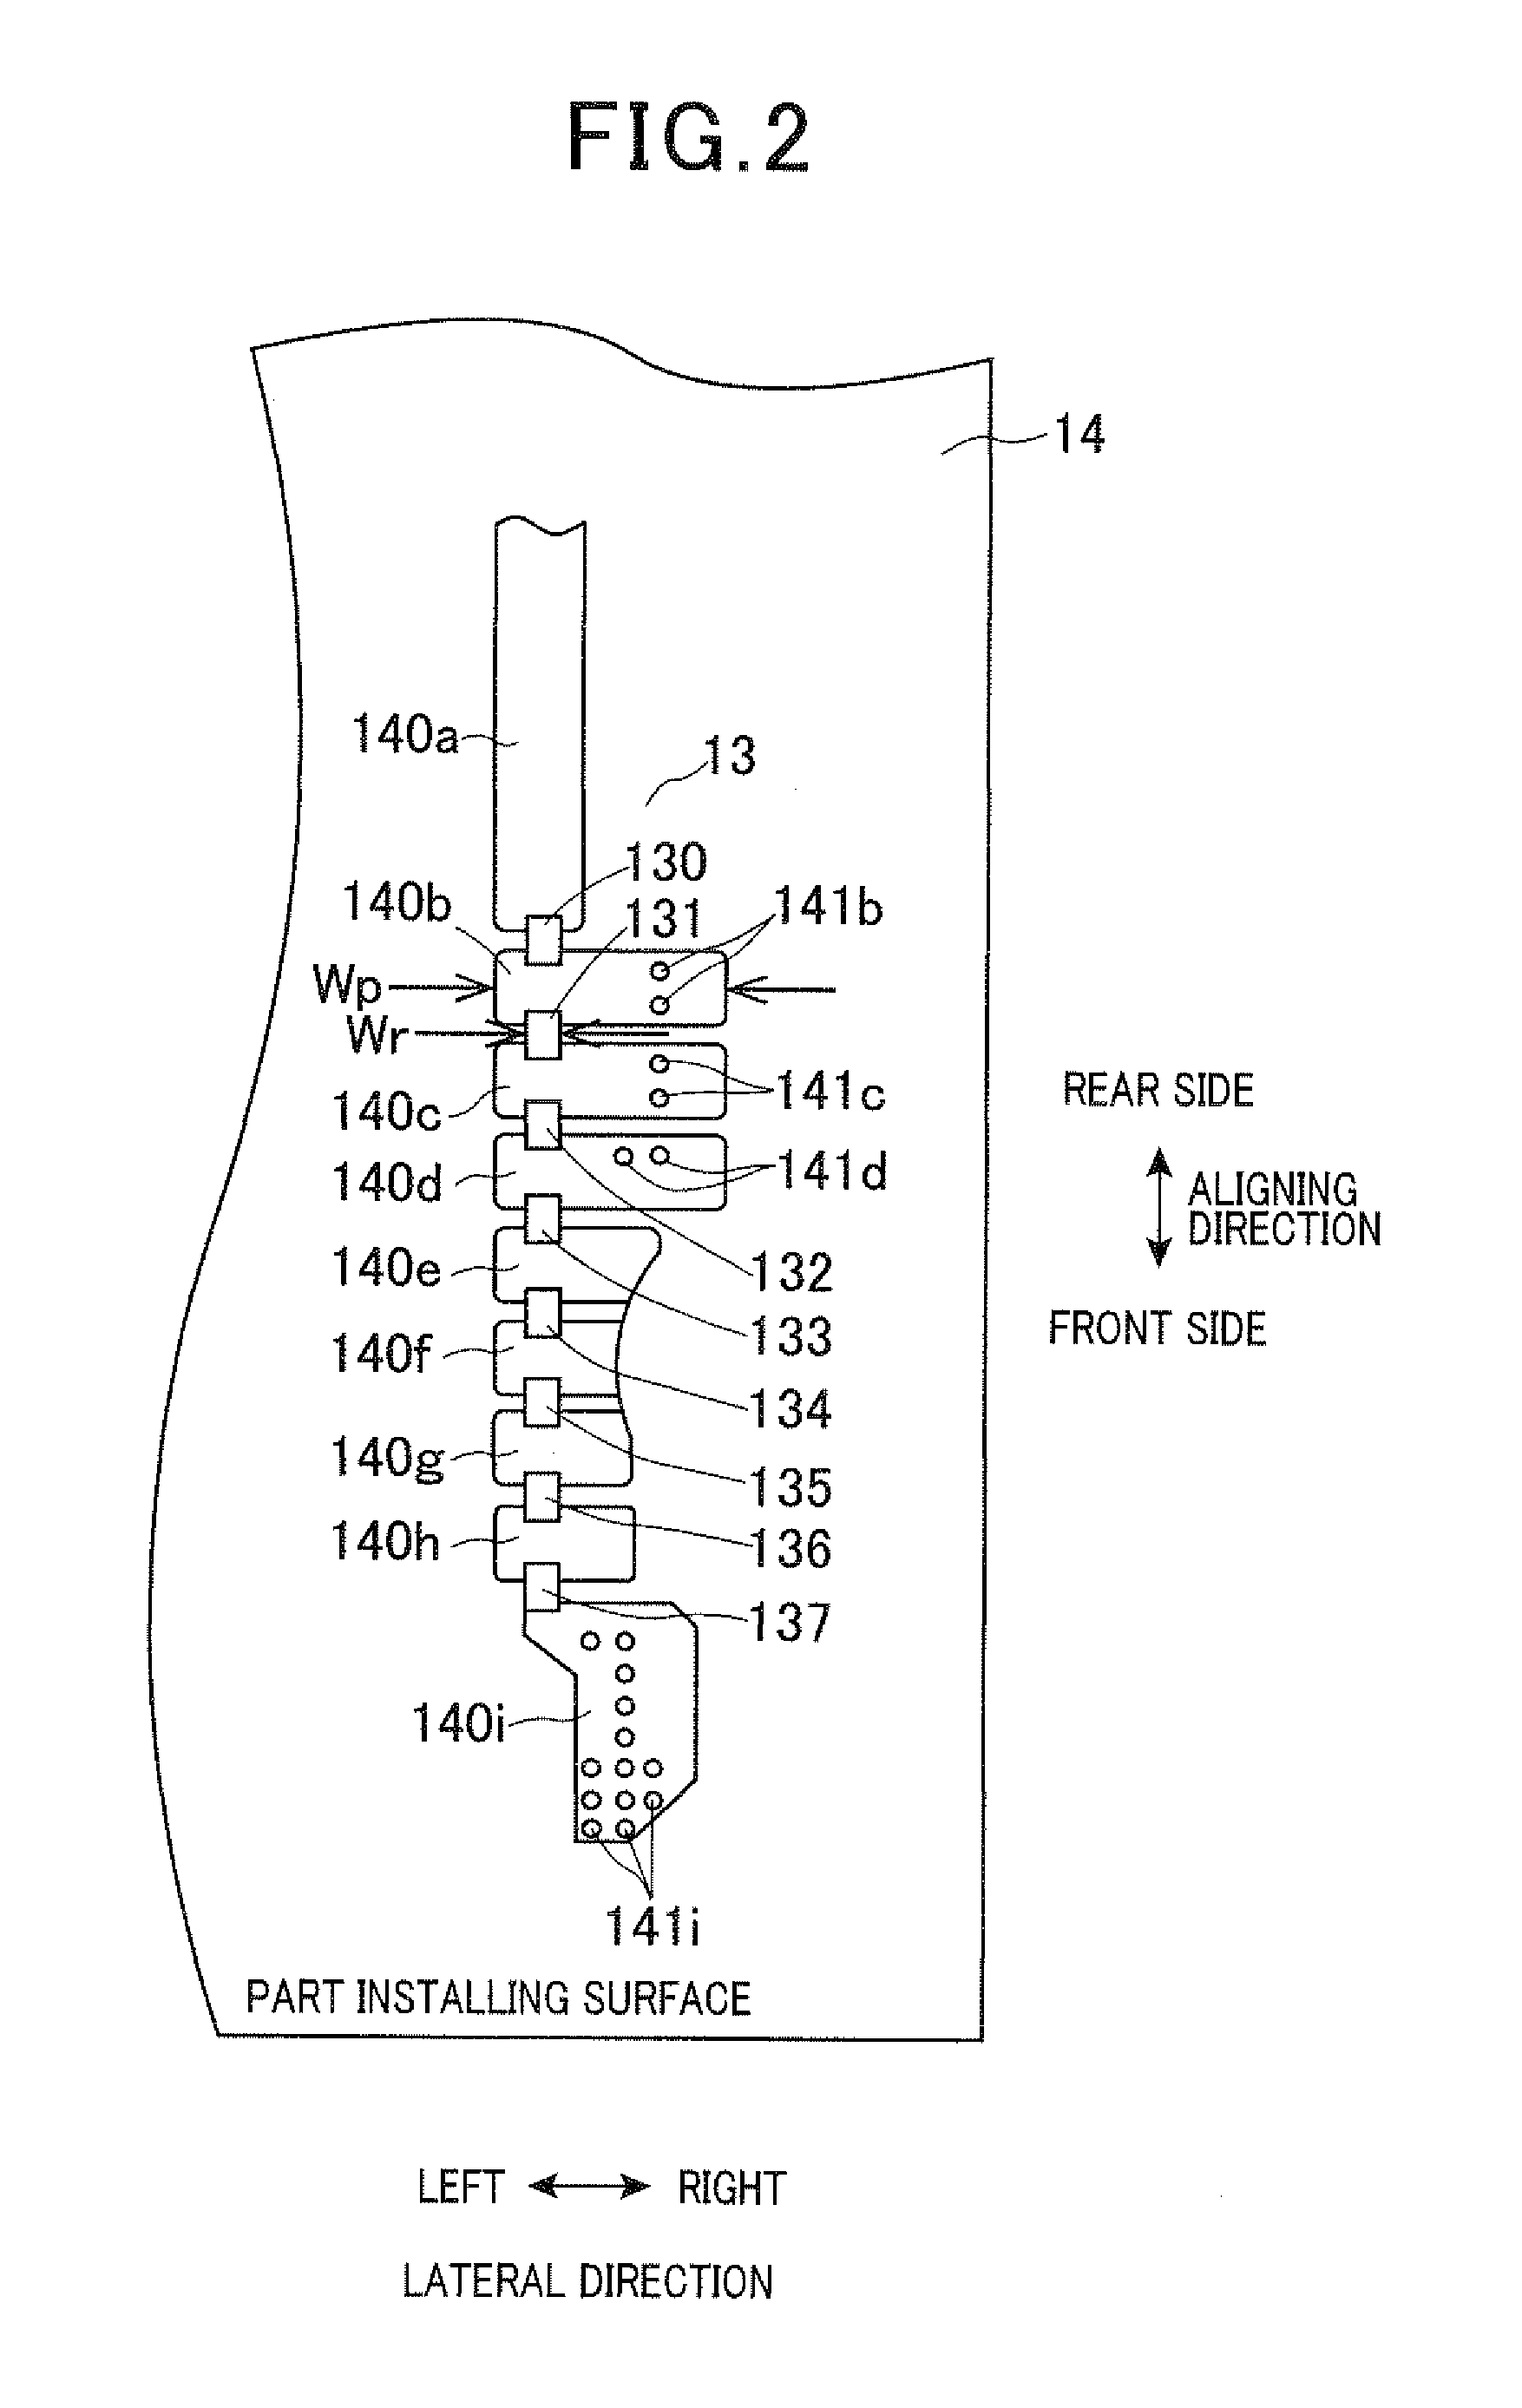 Electronic system having resistors serially connected